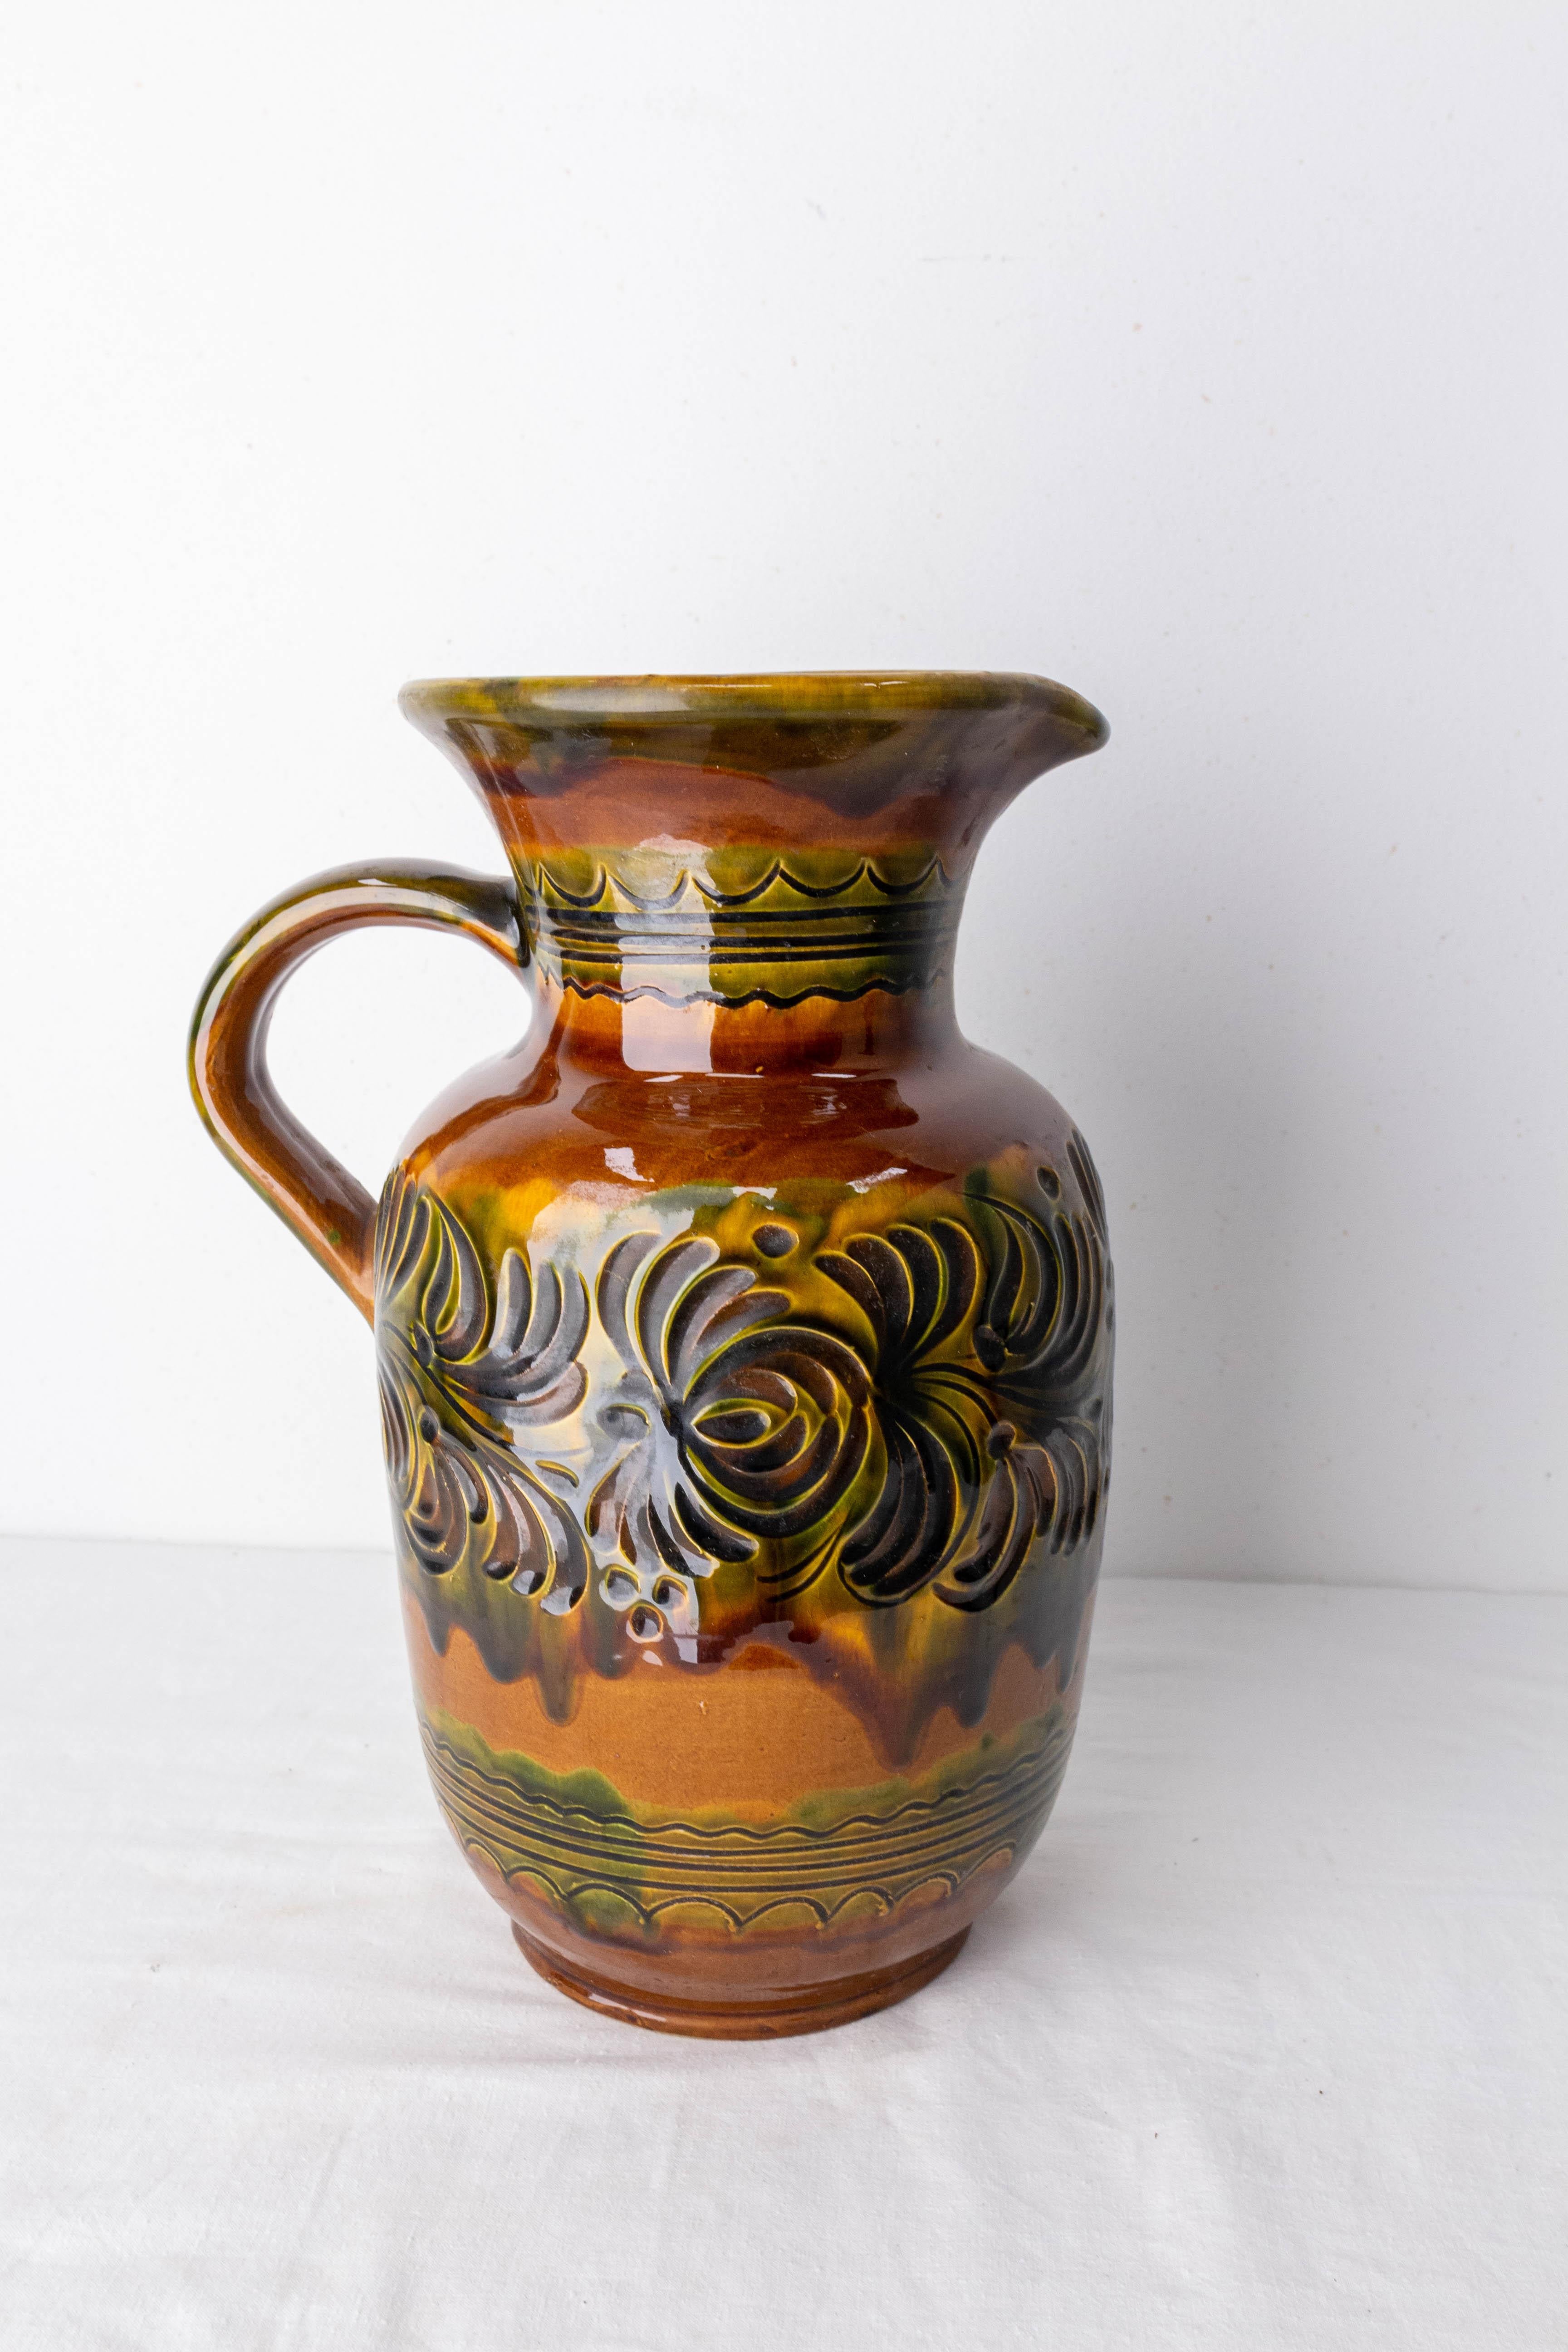 German ceramic pitcher.
Decoration of relief leaves with a camaieu of yellow, red and green colors.
Good condition.

Shipping:
L 20 P 15 H 27,50 cm 1,6 kg.
 